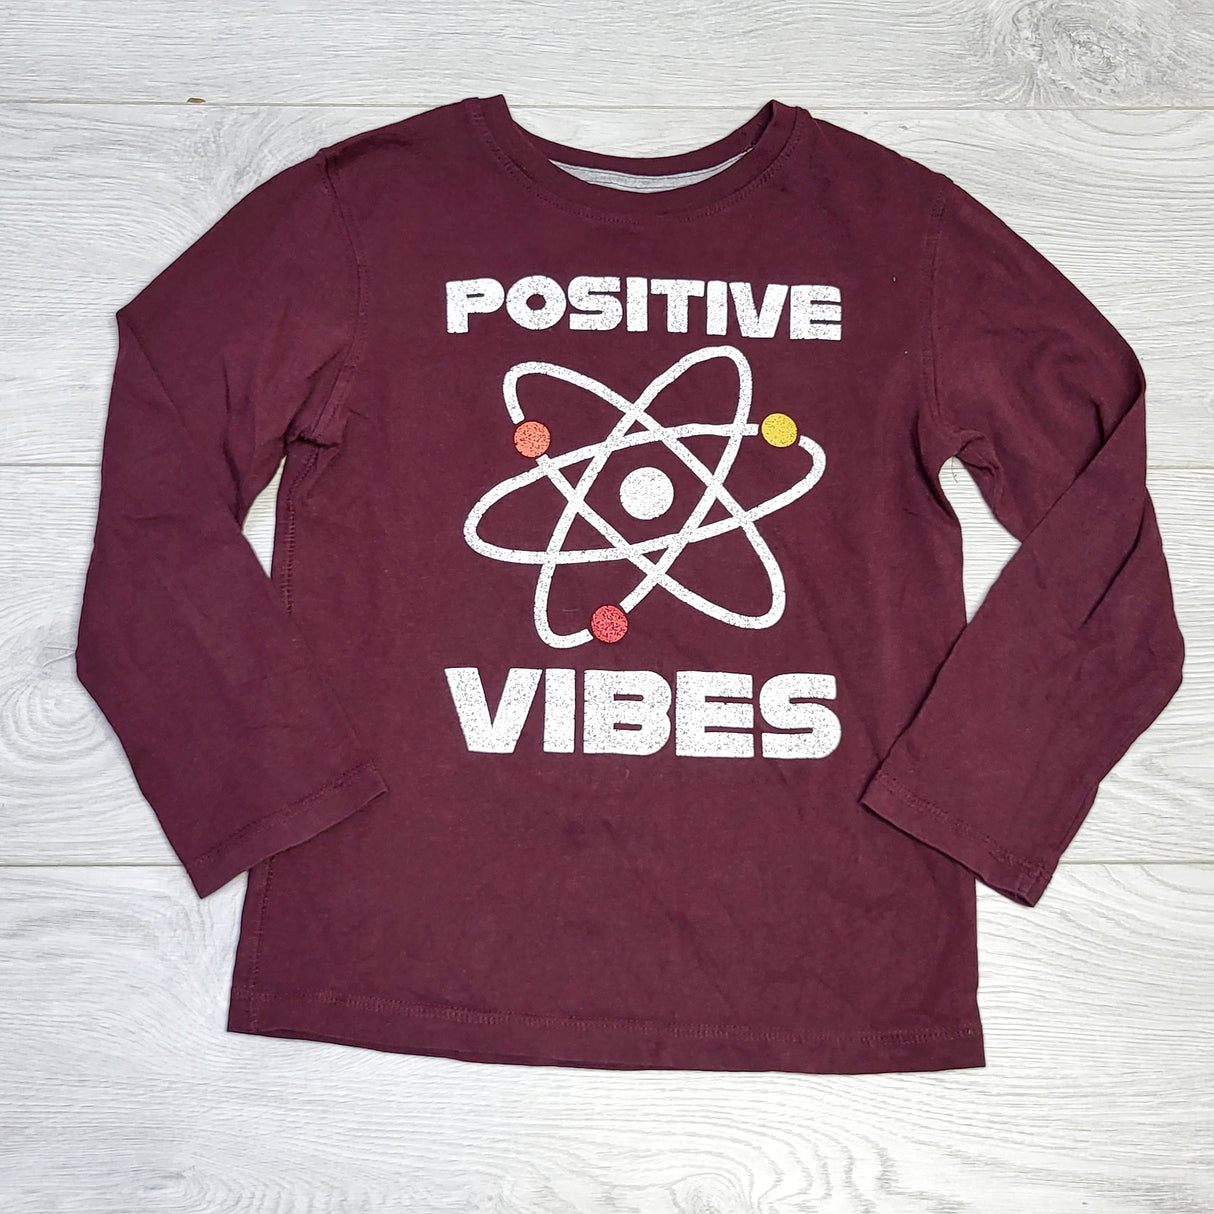 MSNDS1 - George burgundy "Positive Vibes" long sleeved top. Size 6